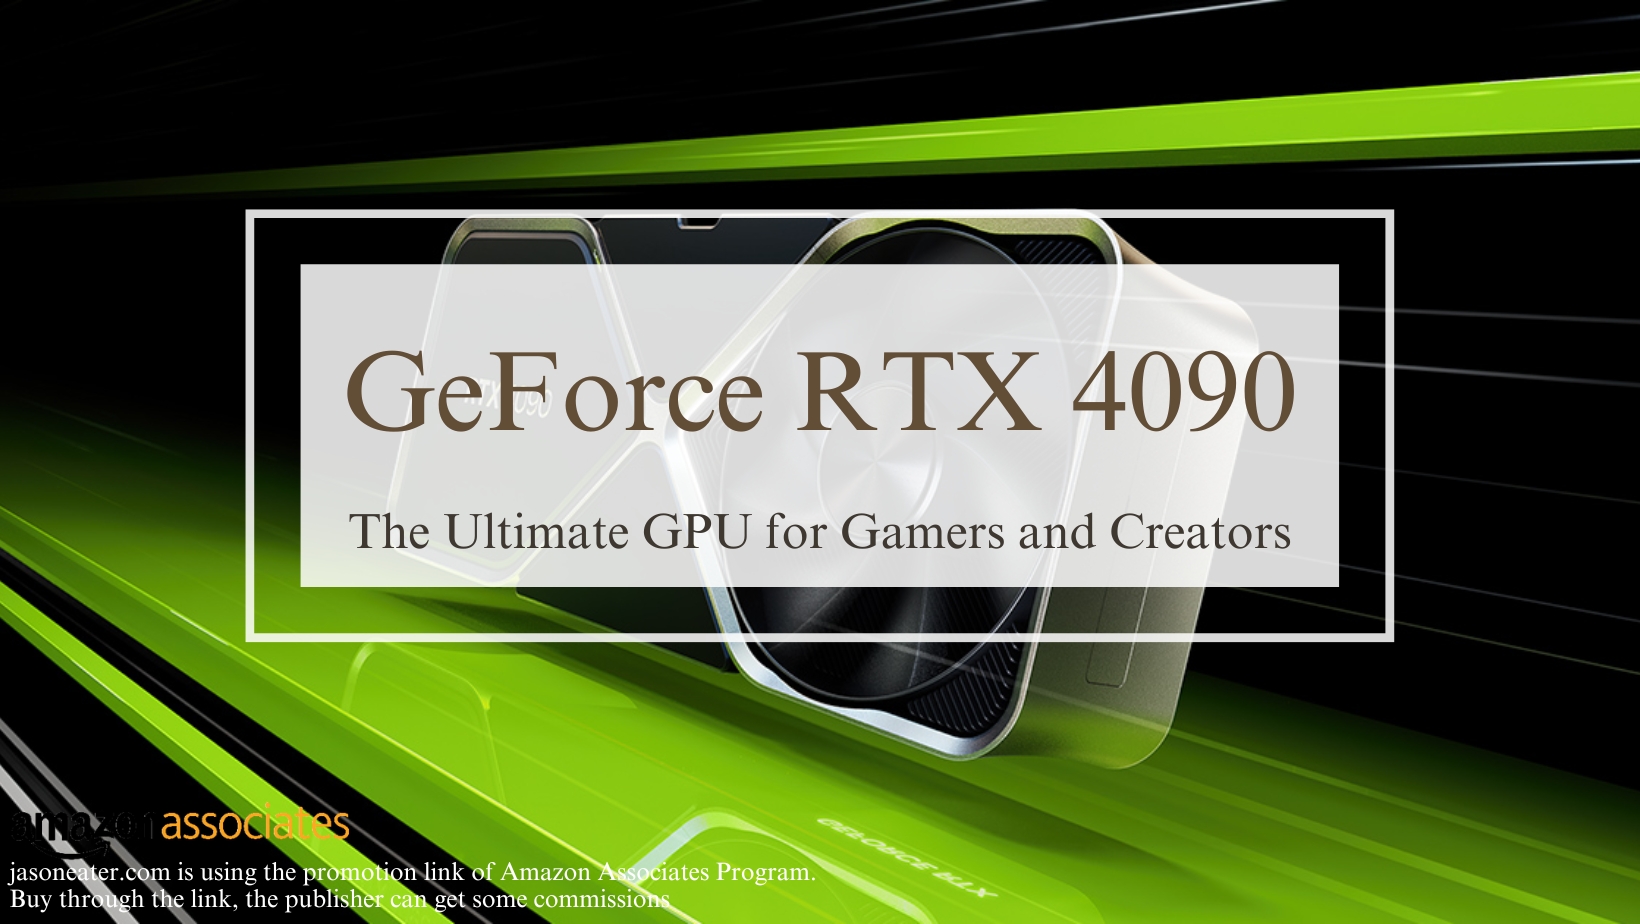 GeForce RTX 4090: The Ultimate GPU for Gamers and Creators